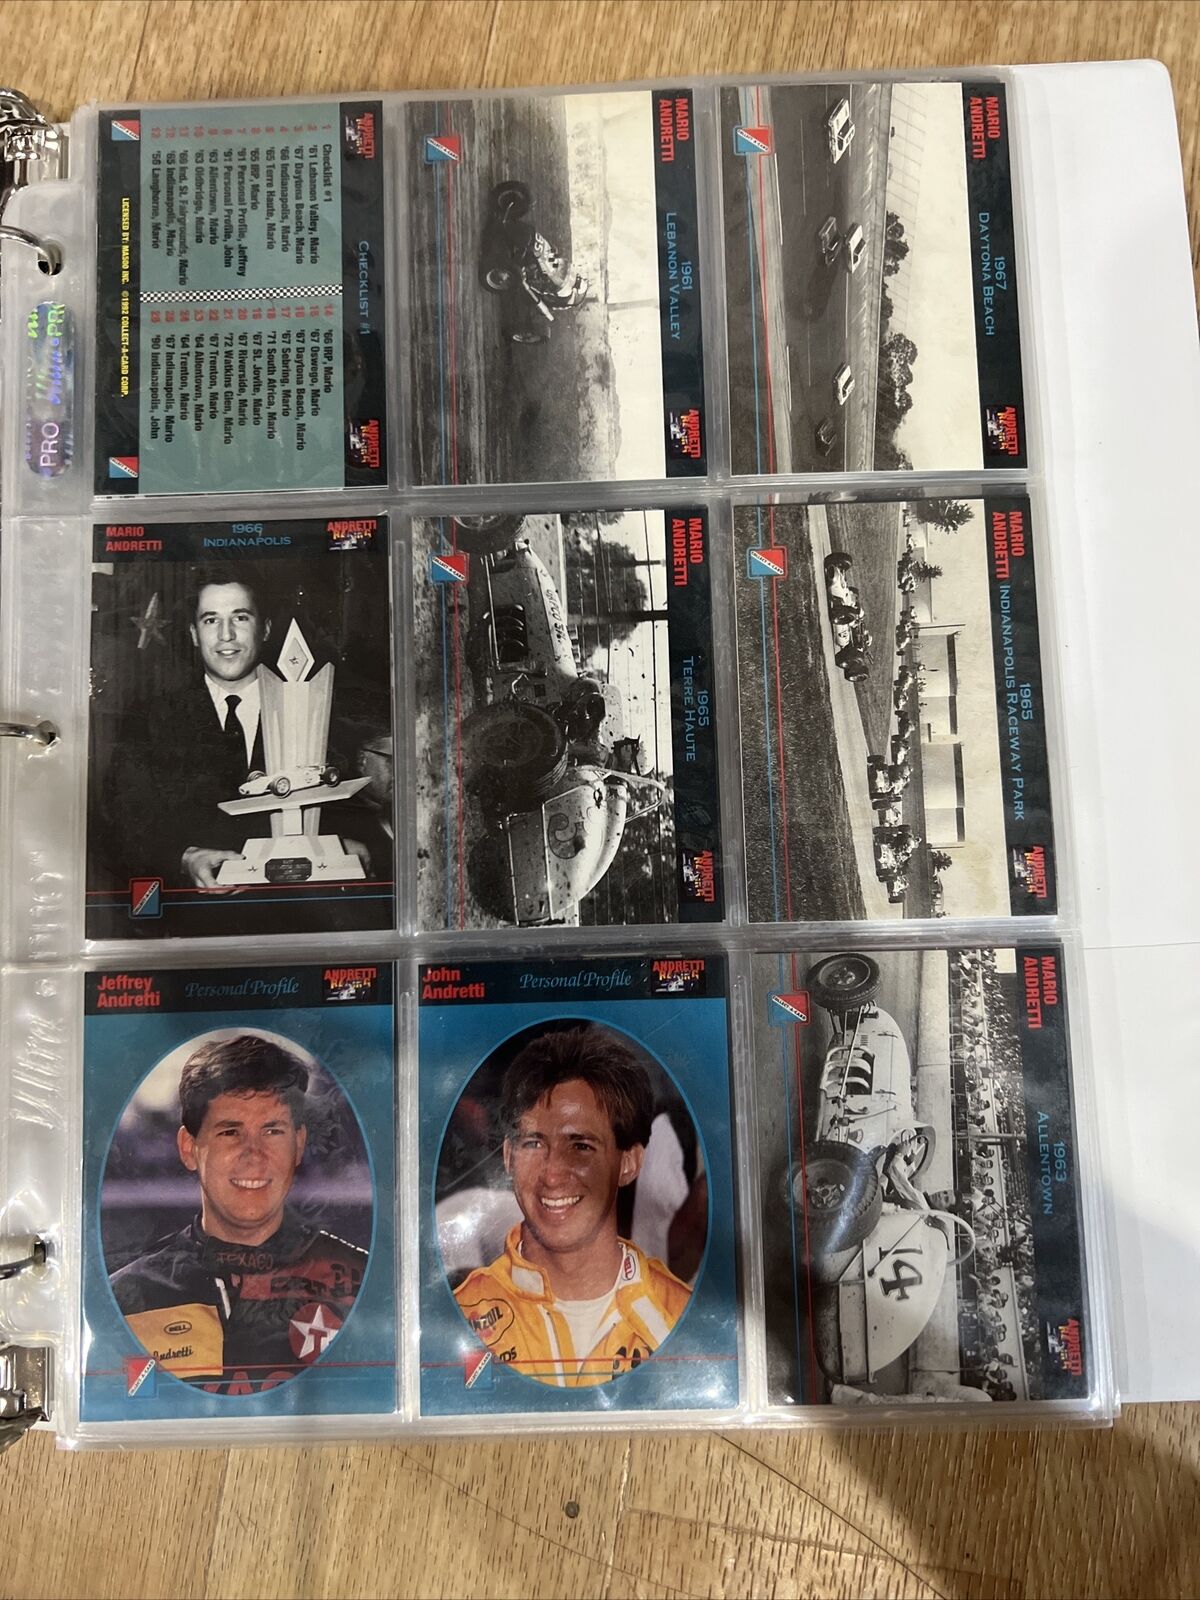 Andretti : très rare set complet de 100 Trading Cards Collect-A-Card Wrapped Min